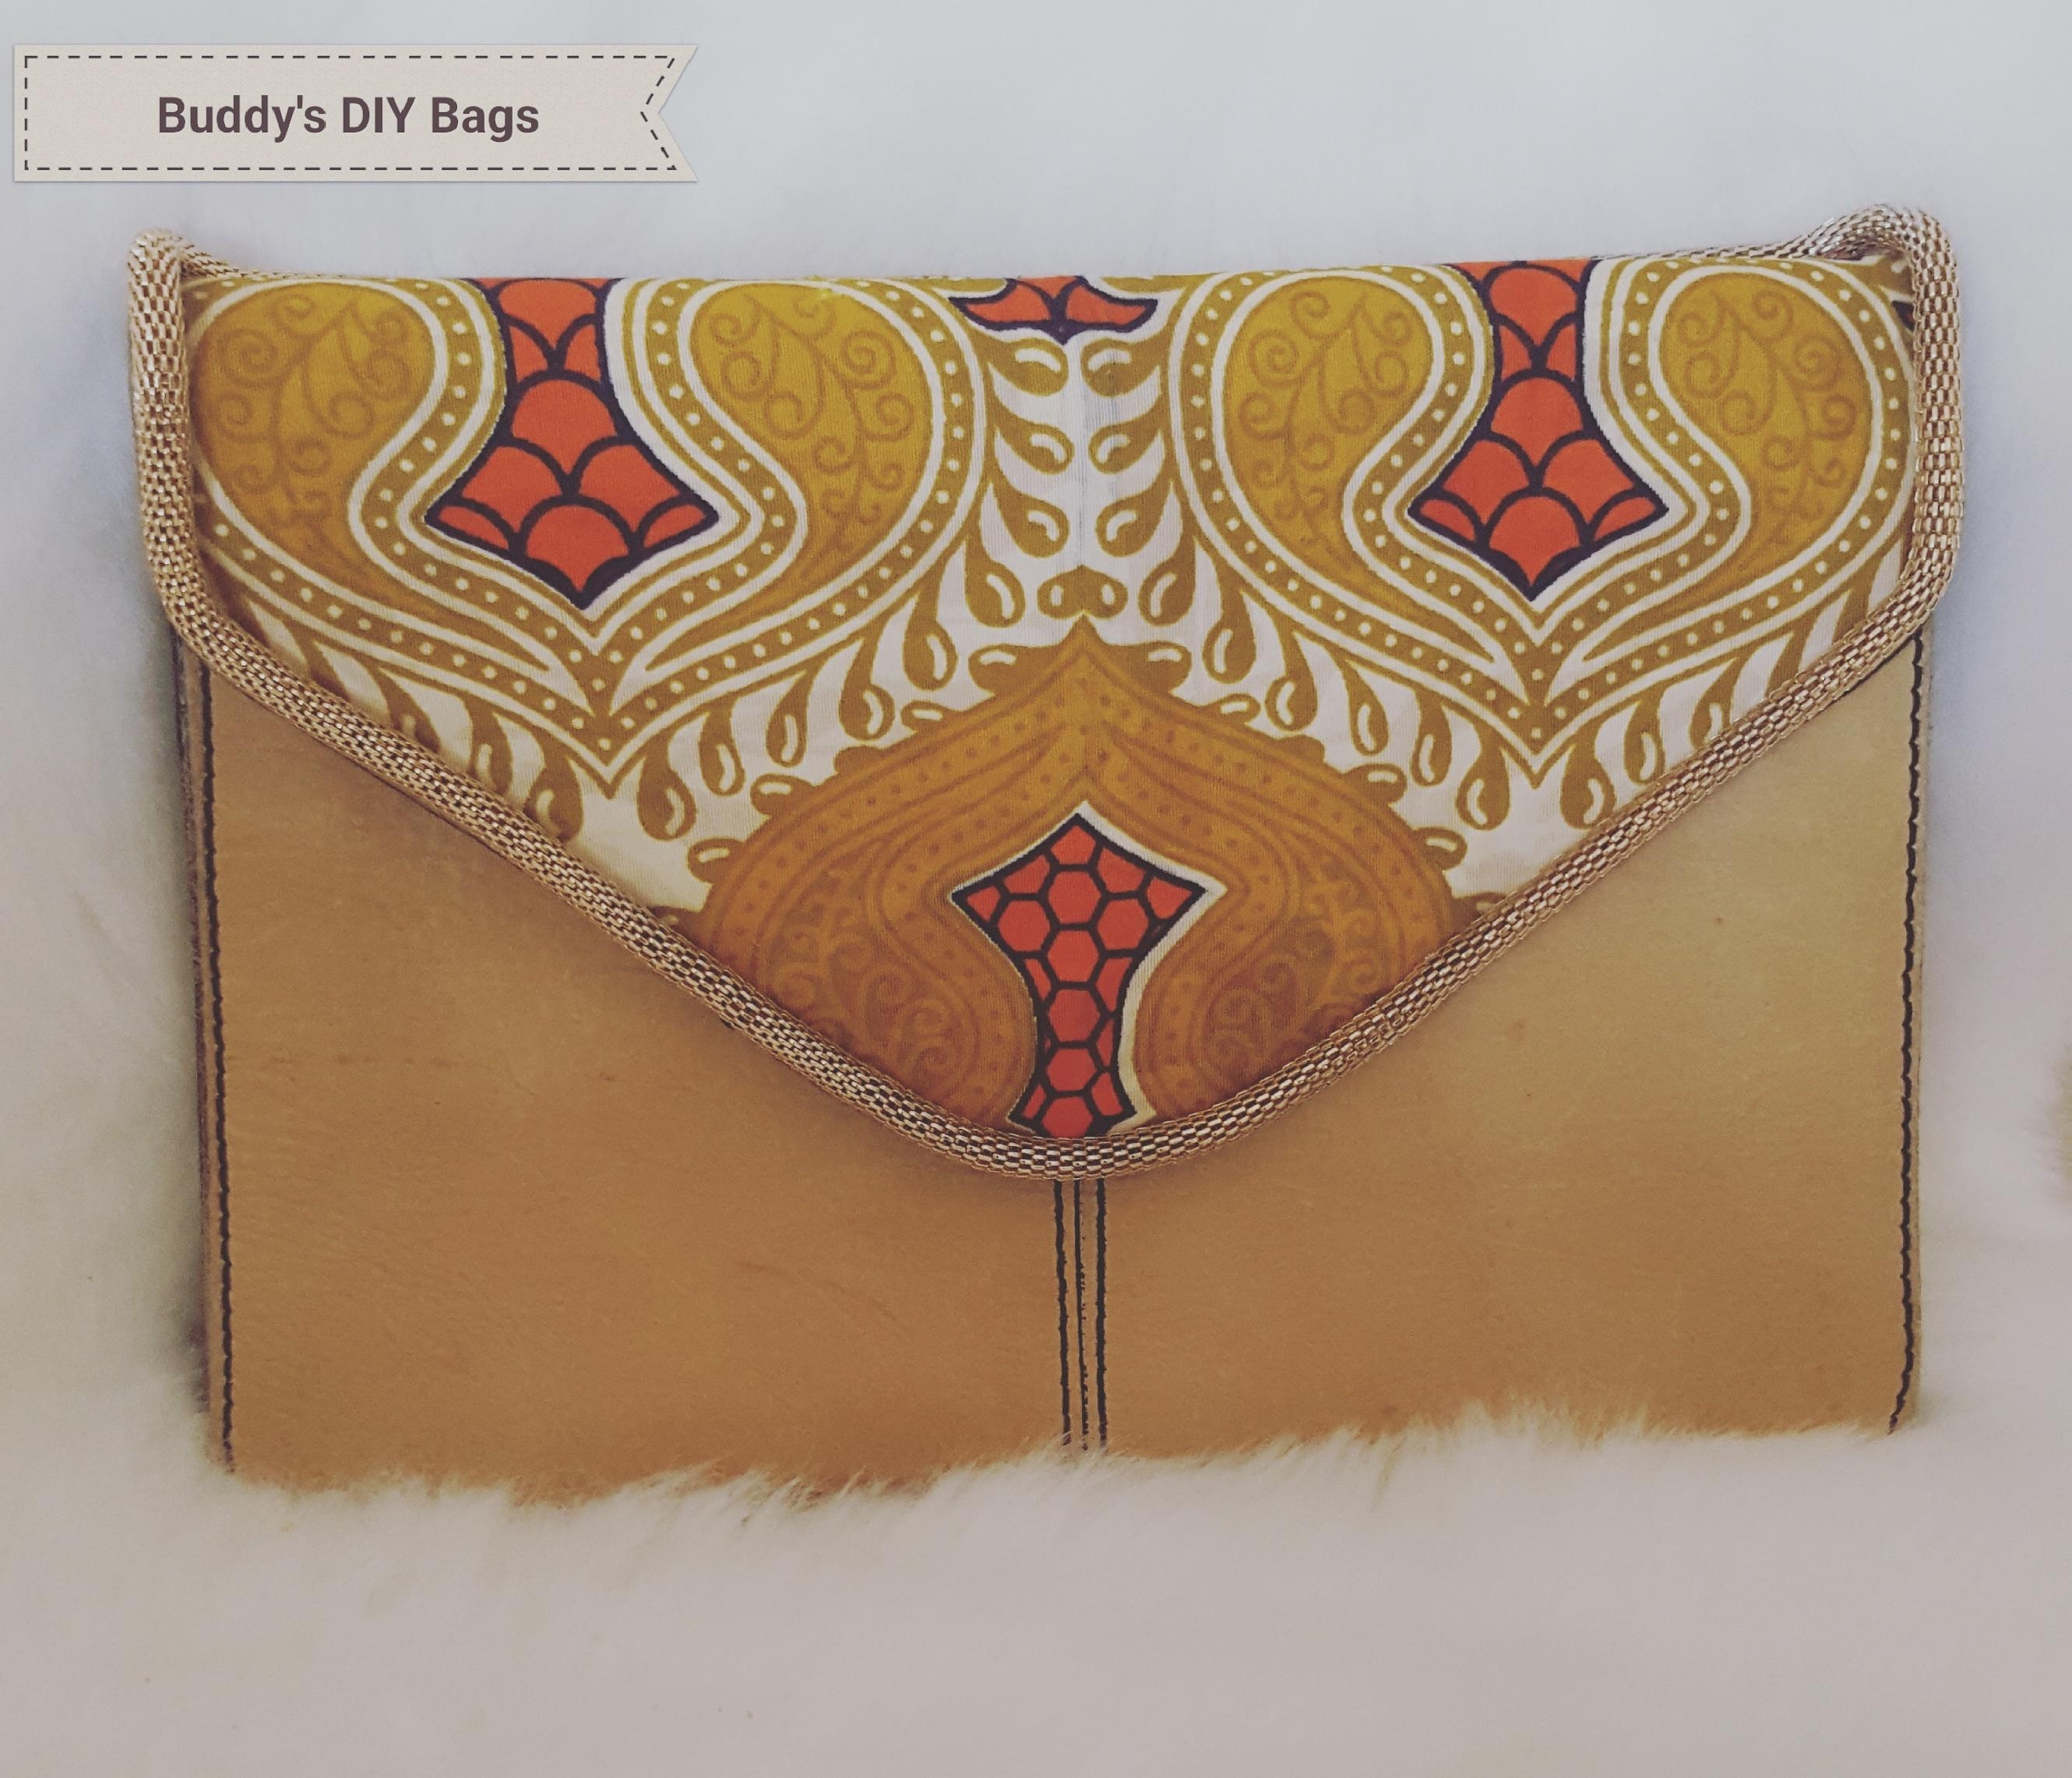 My Vintage clutch make-over♡
#buddysdiybags #vintageclutch #africantouch #leather #l♡bags